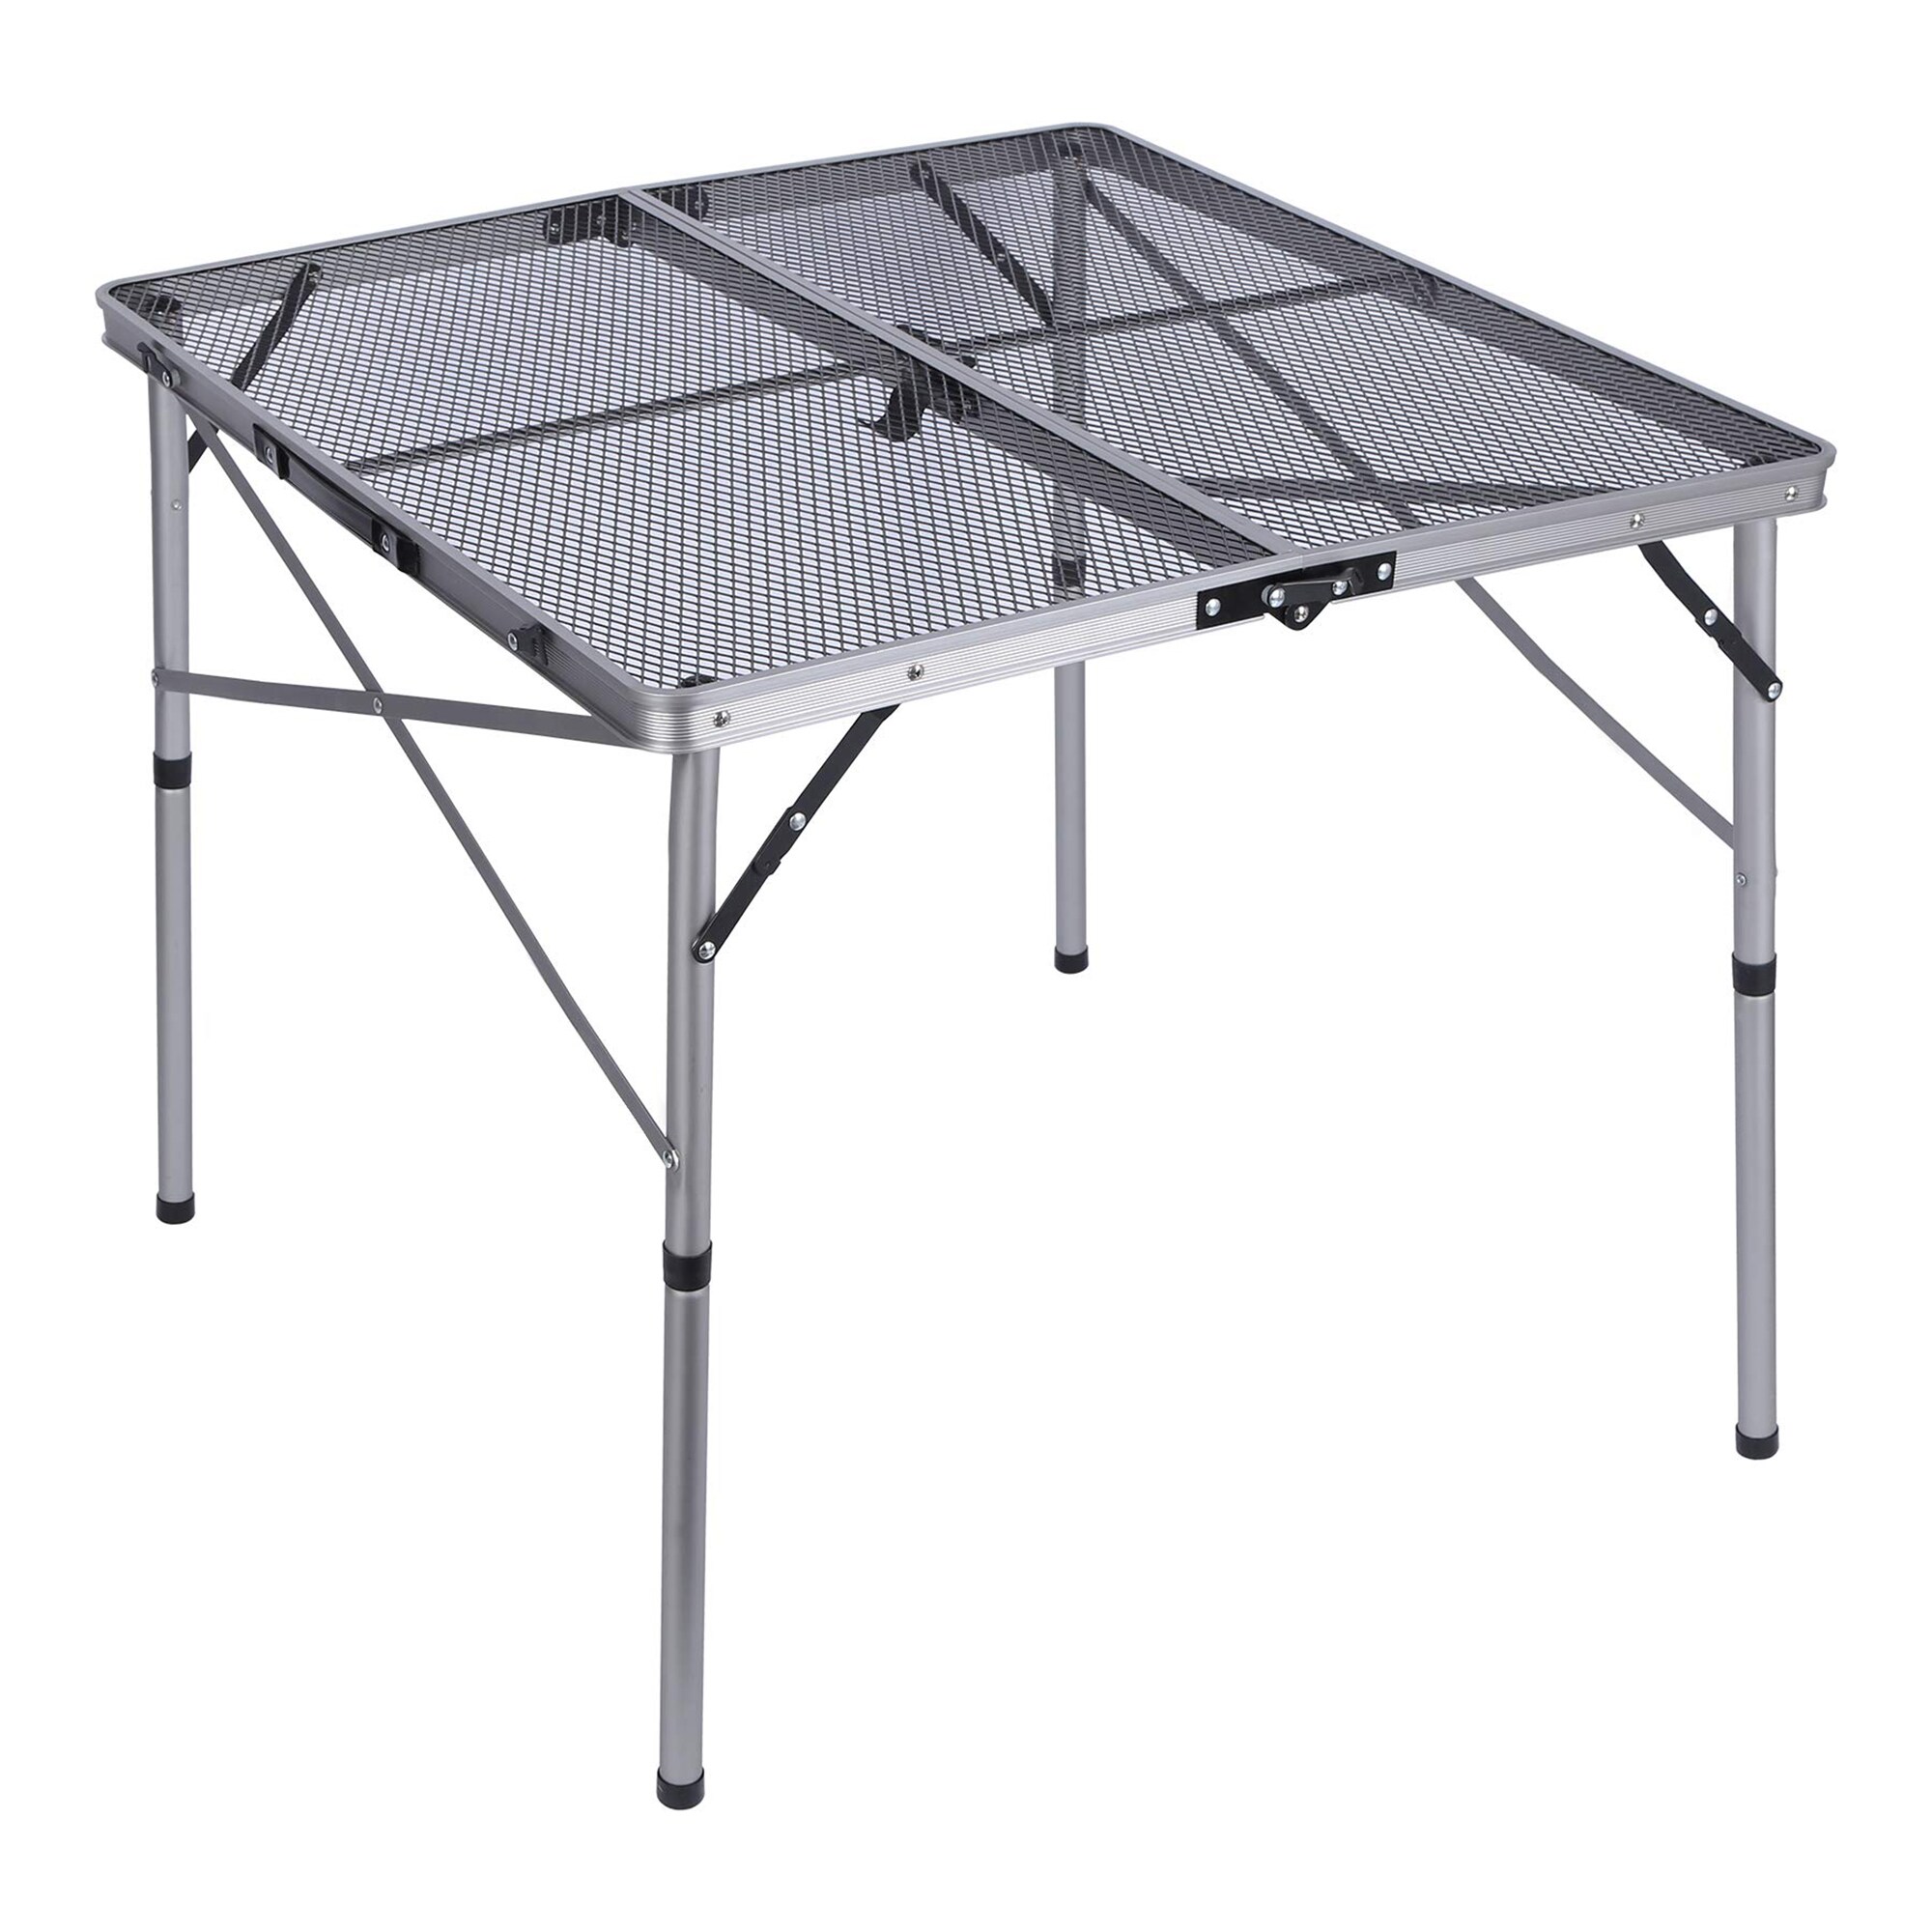 Camp Chef 17.5-in Black Steel Rectangle Folding Picnic Table in